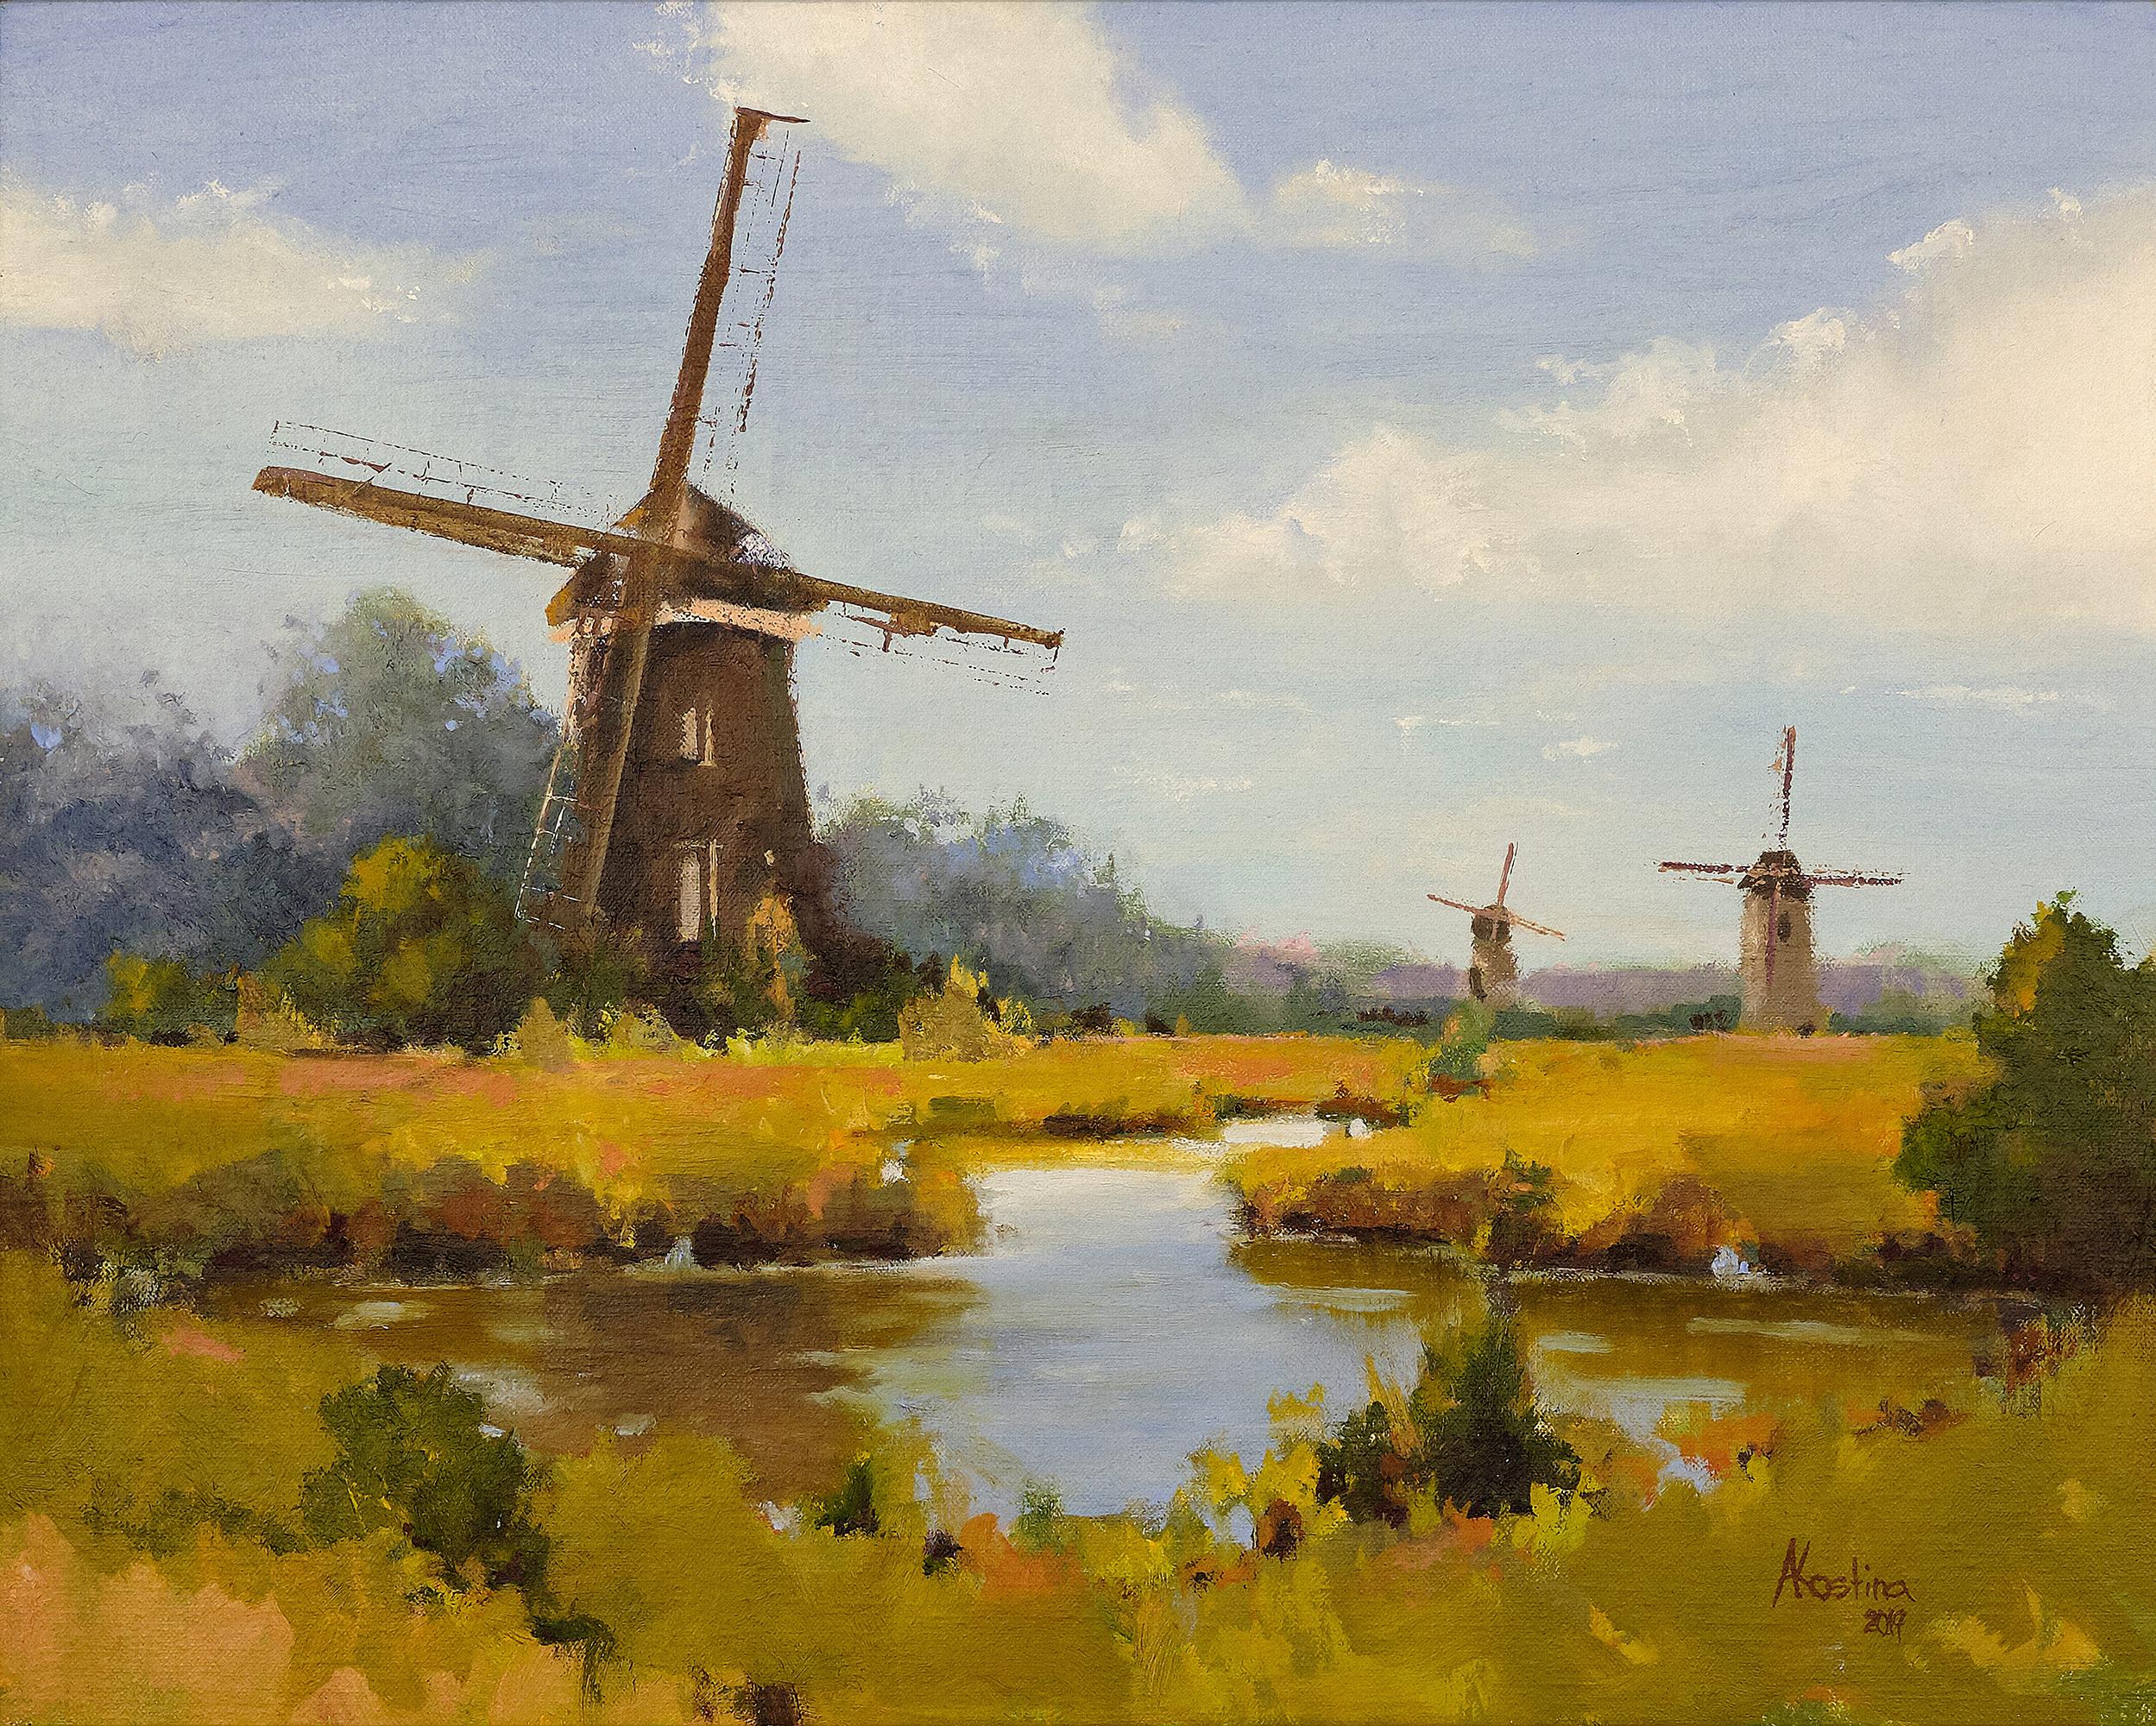 This warm, realistic painting depicting a day exploring the Dutch countryside features a golden field with a stream bisecting the landscape with windmills dotting the landscape.  The soft blue sky with clouds evokes thoughts of a warm summer day in